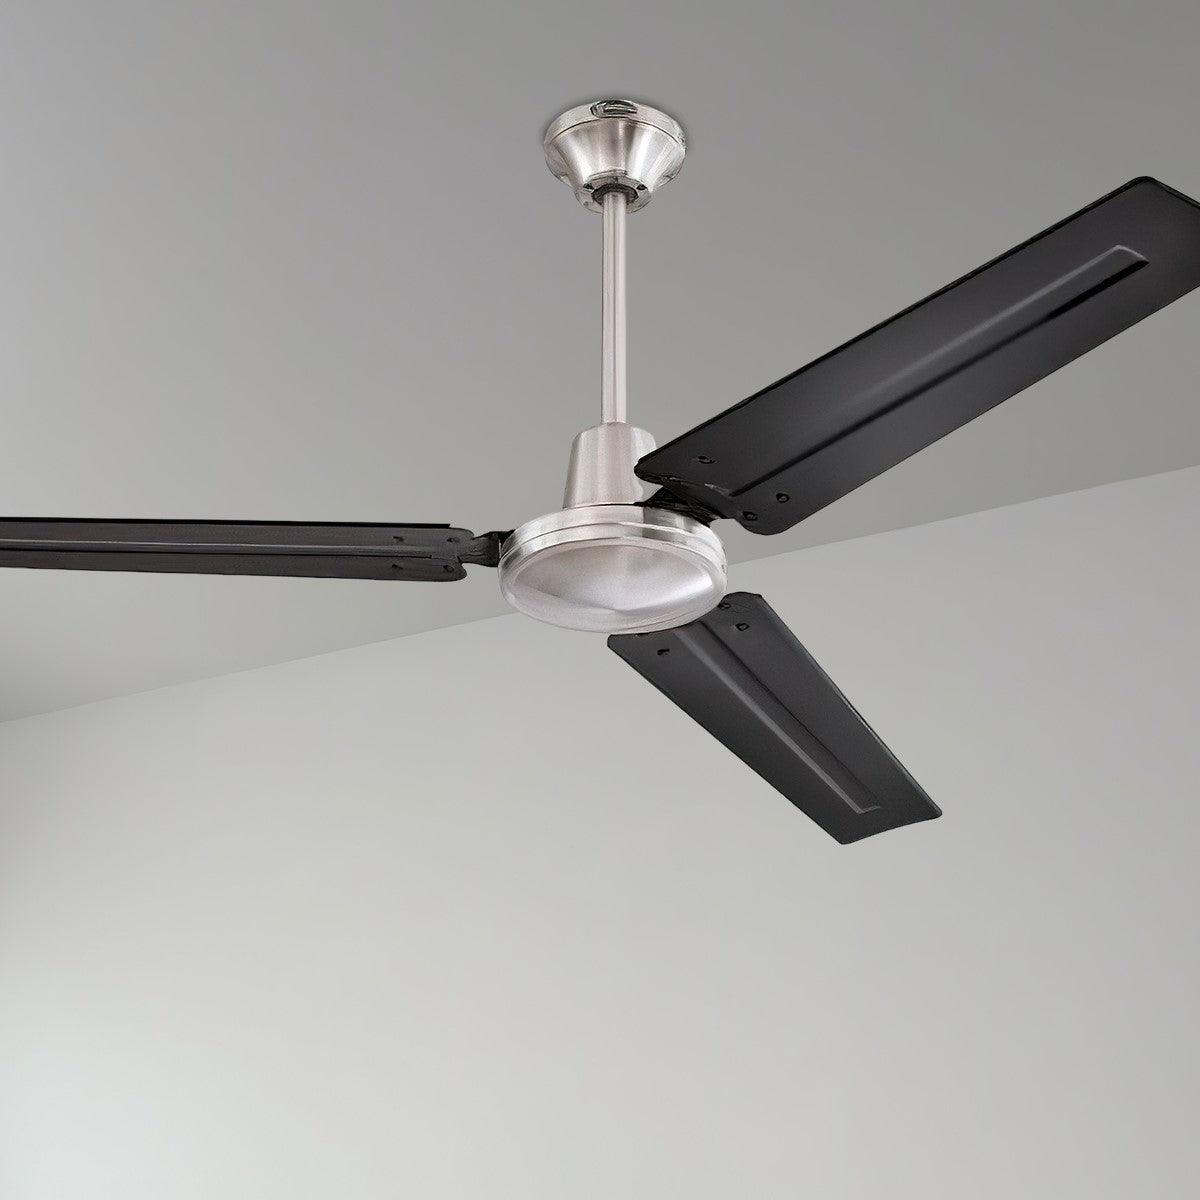 Jax 56 Inch Industrial Ceiling Fan With Wall Control, Brushed Nickel Finish with Black Steel Blades - Bees Lighting